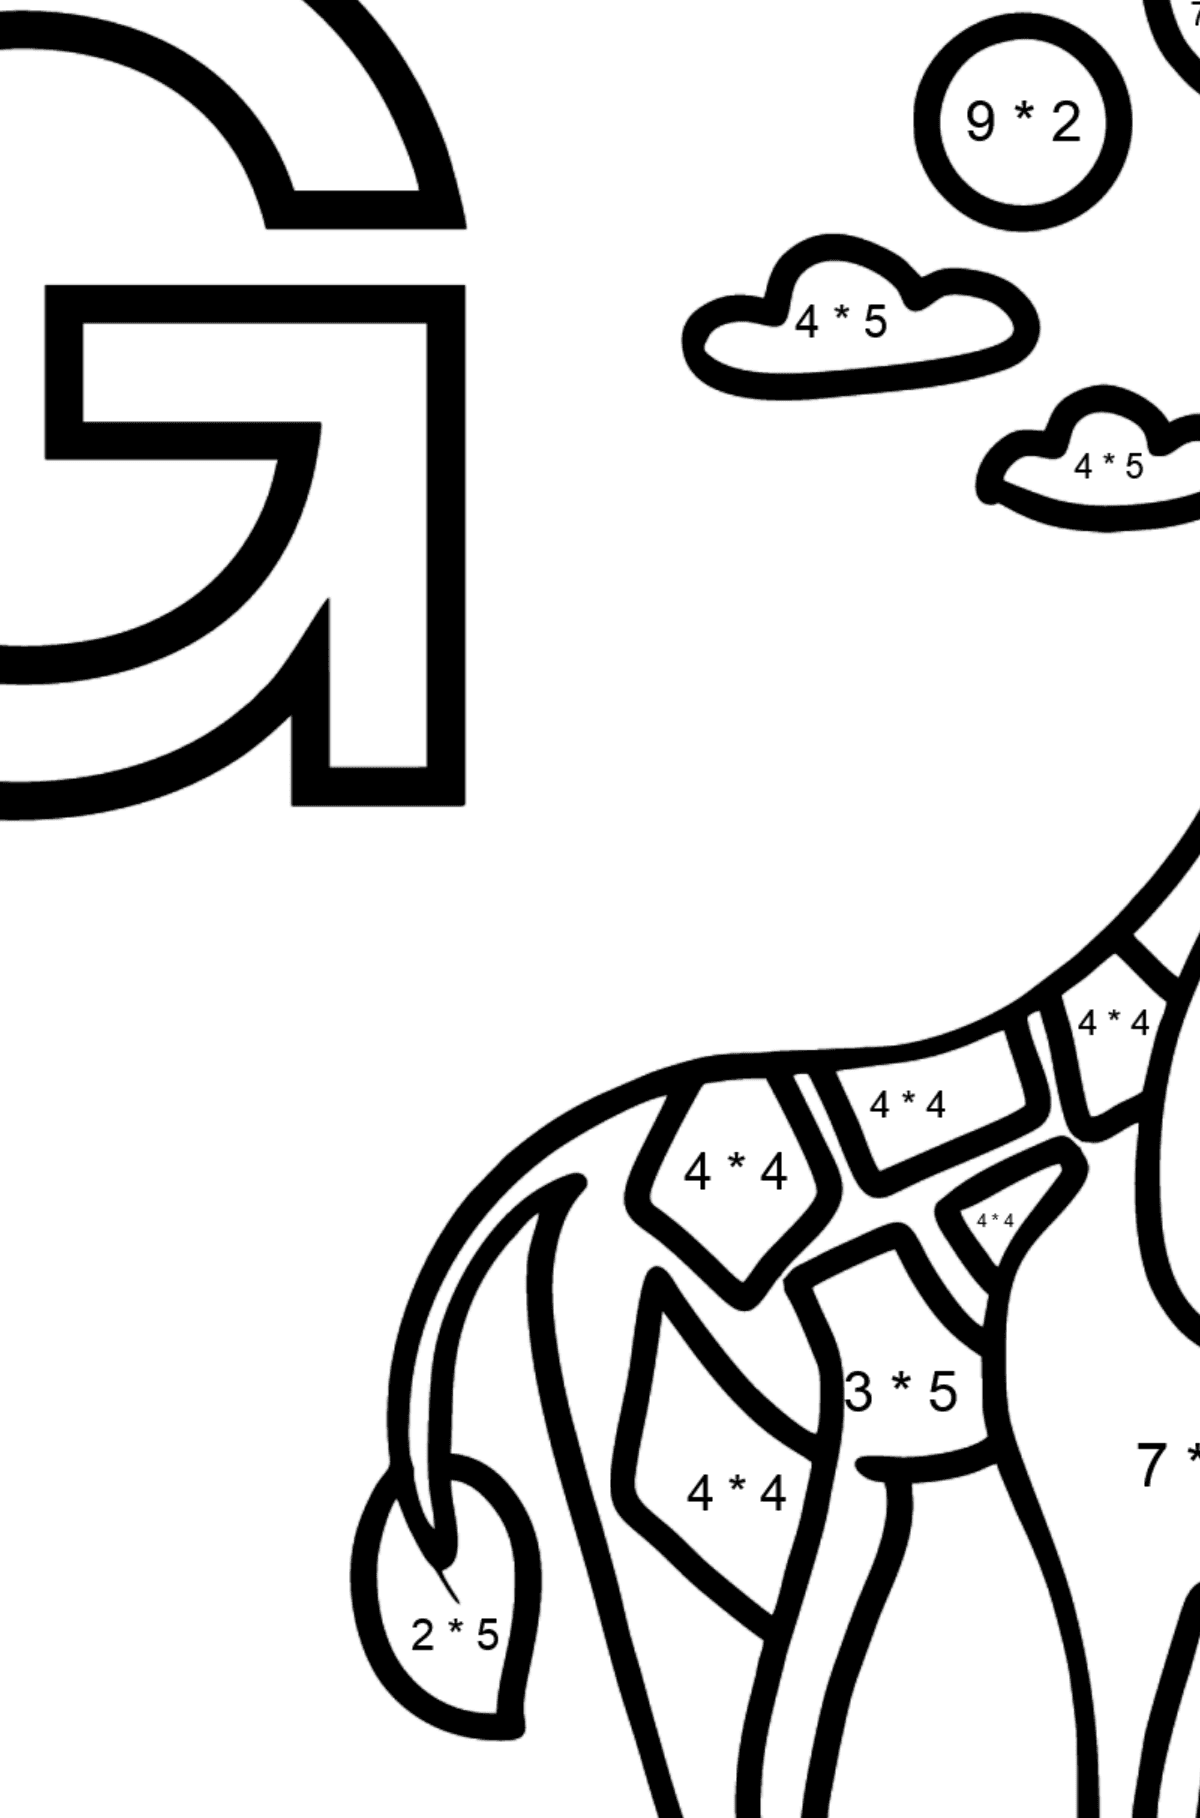 Portuguese Letter G coloring pages - GIRAFA - Math Coloring - Multiplication for Kids